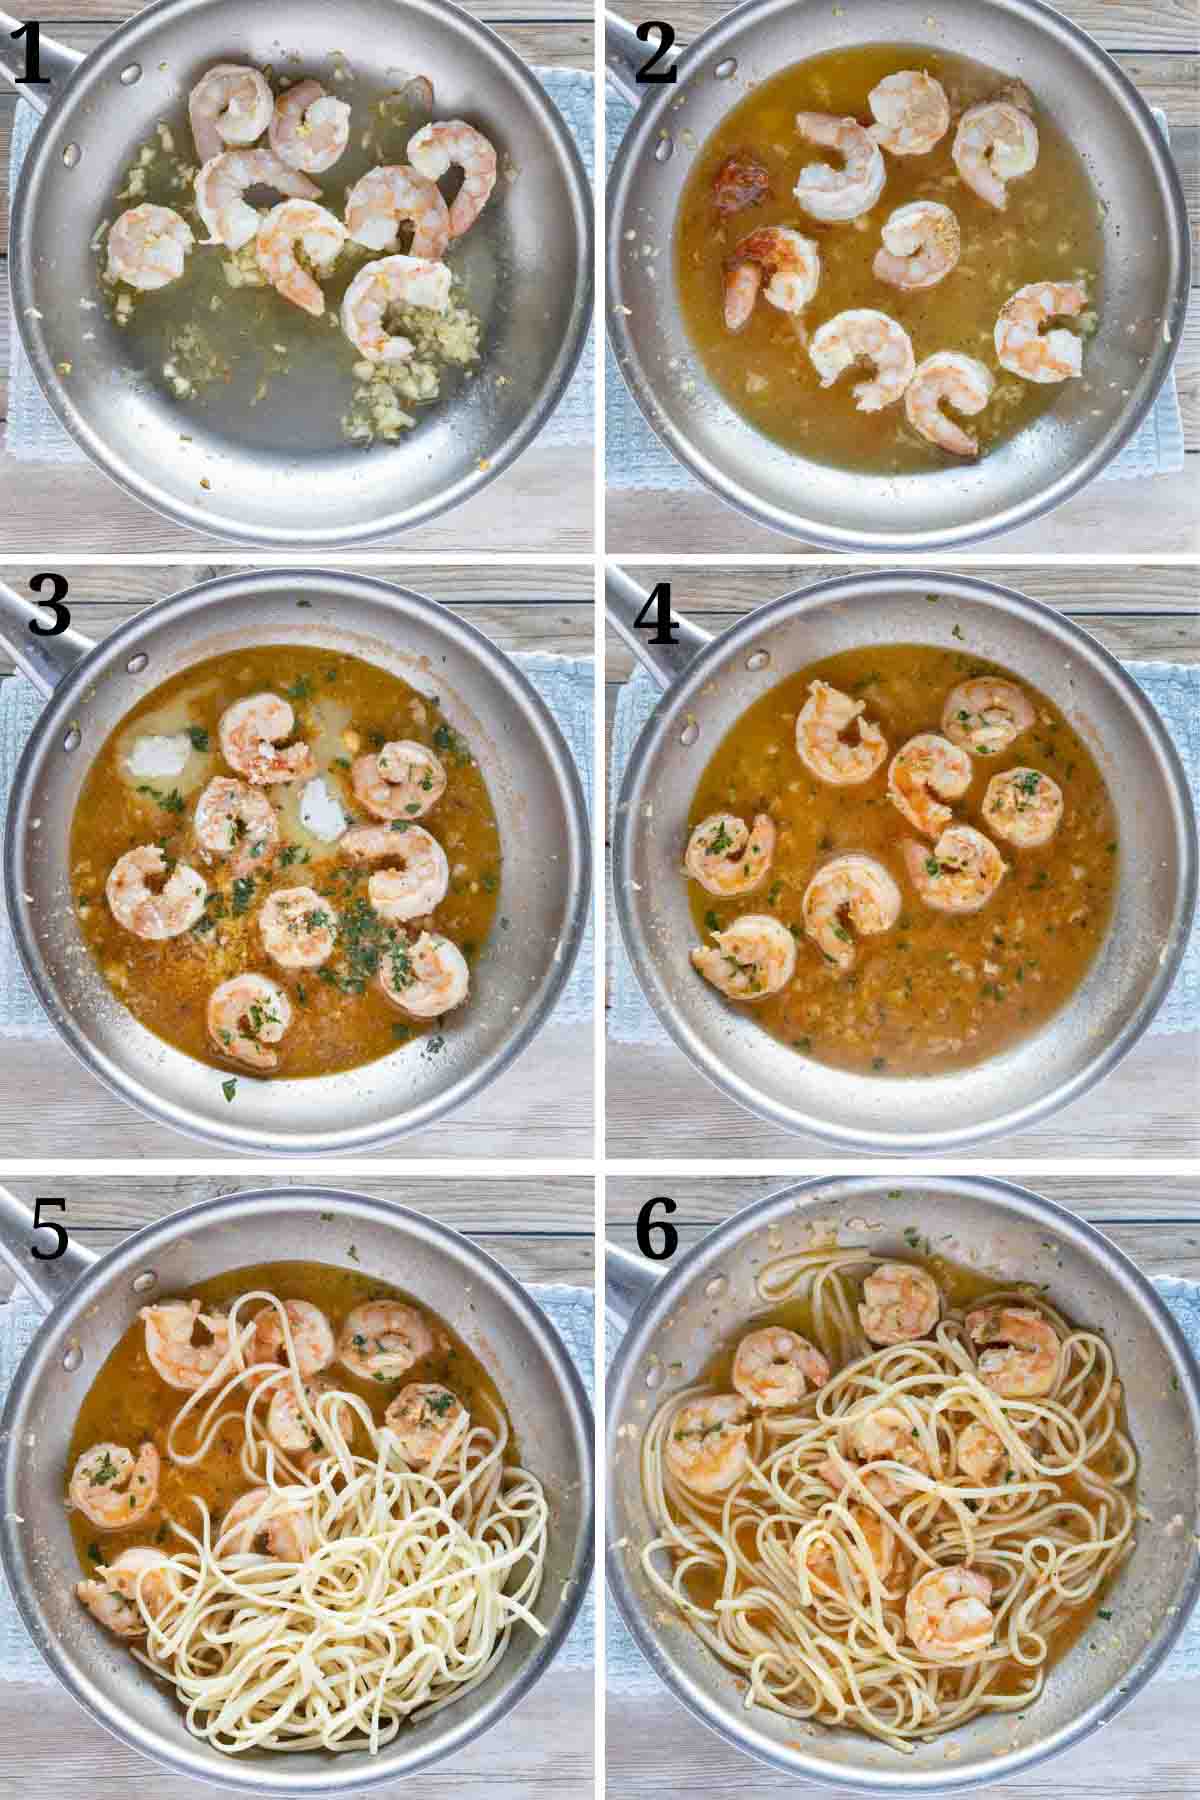 six images showing how to make shrimp scampi.